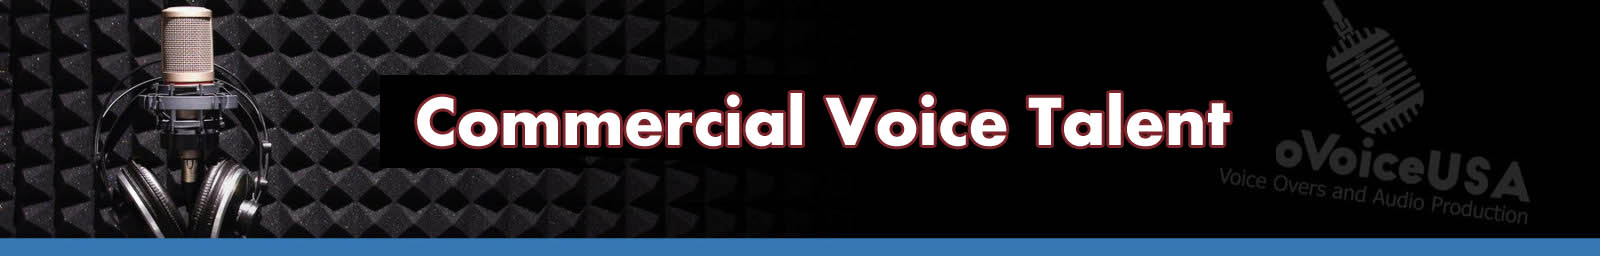 Commercial Voice Talent | American Voice Recording Service | ProVoice USA